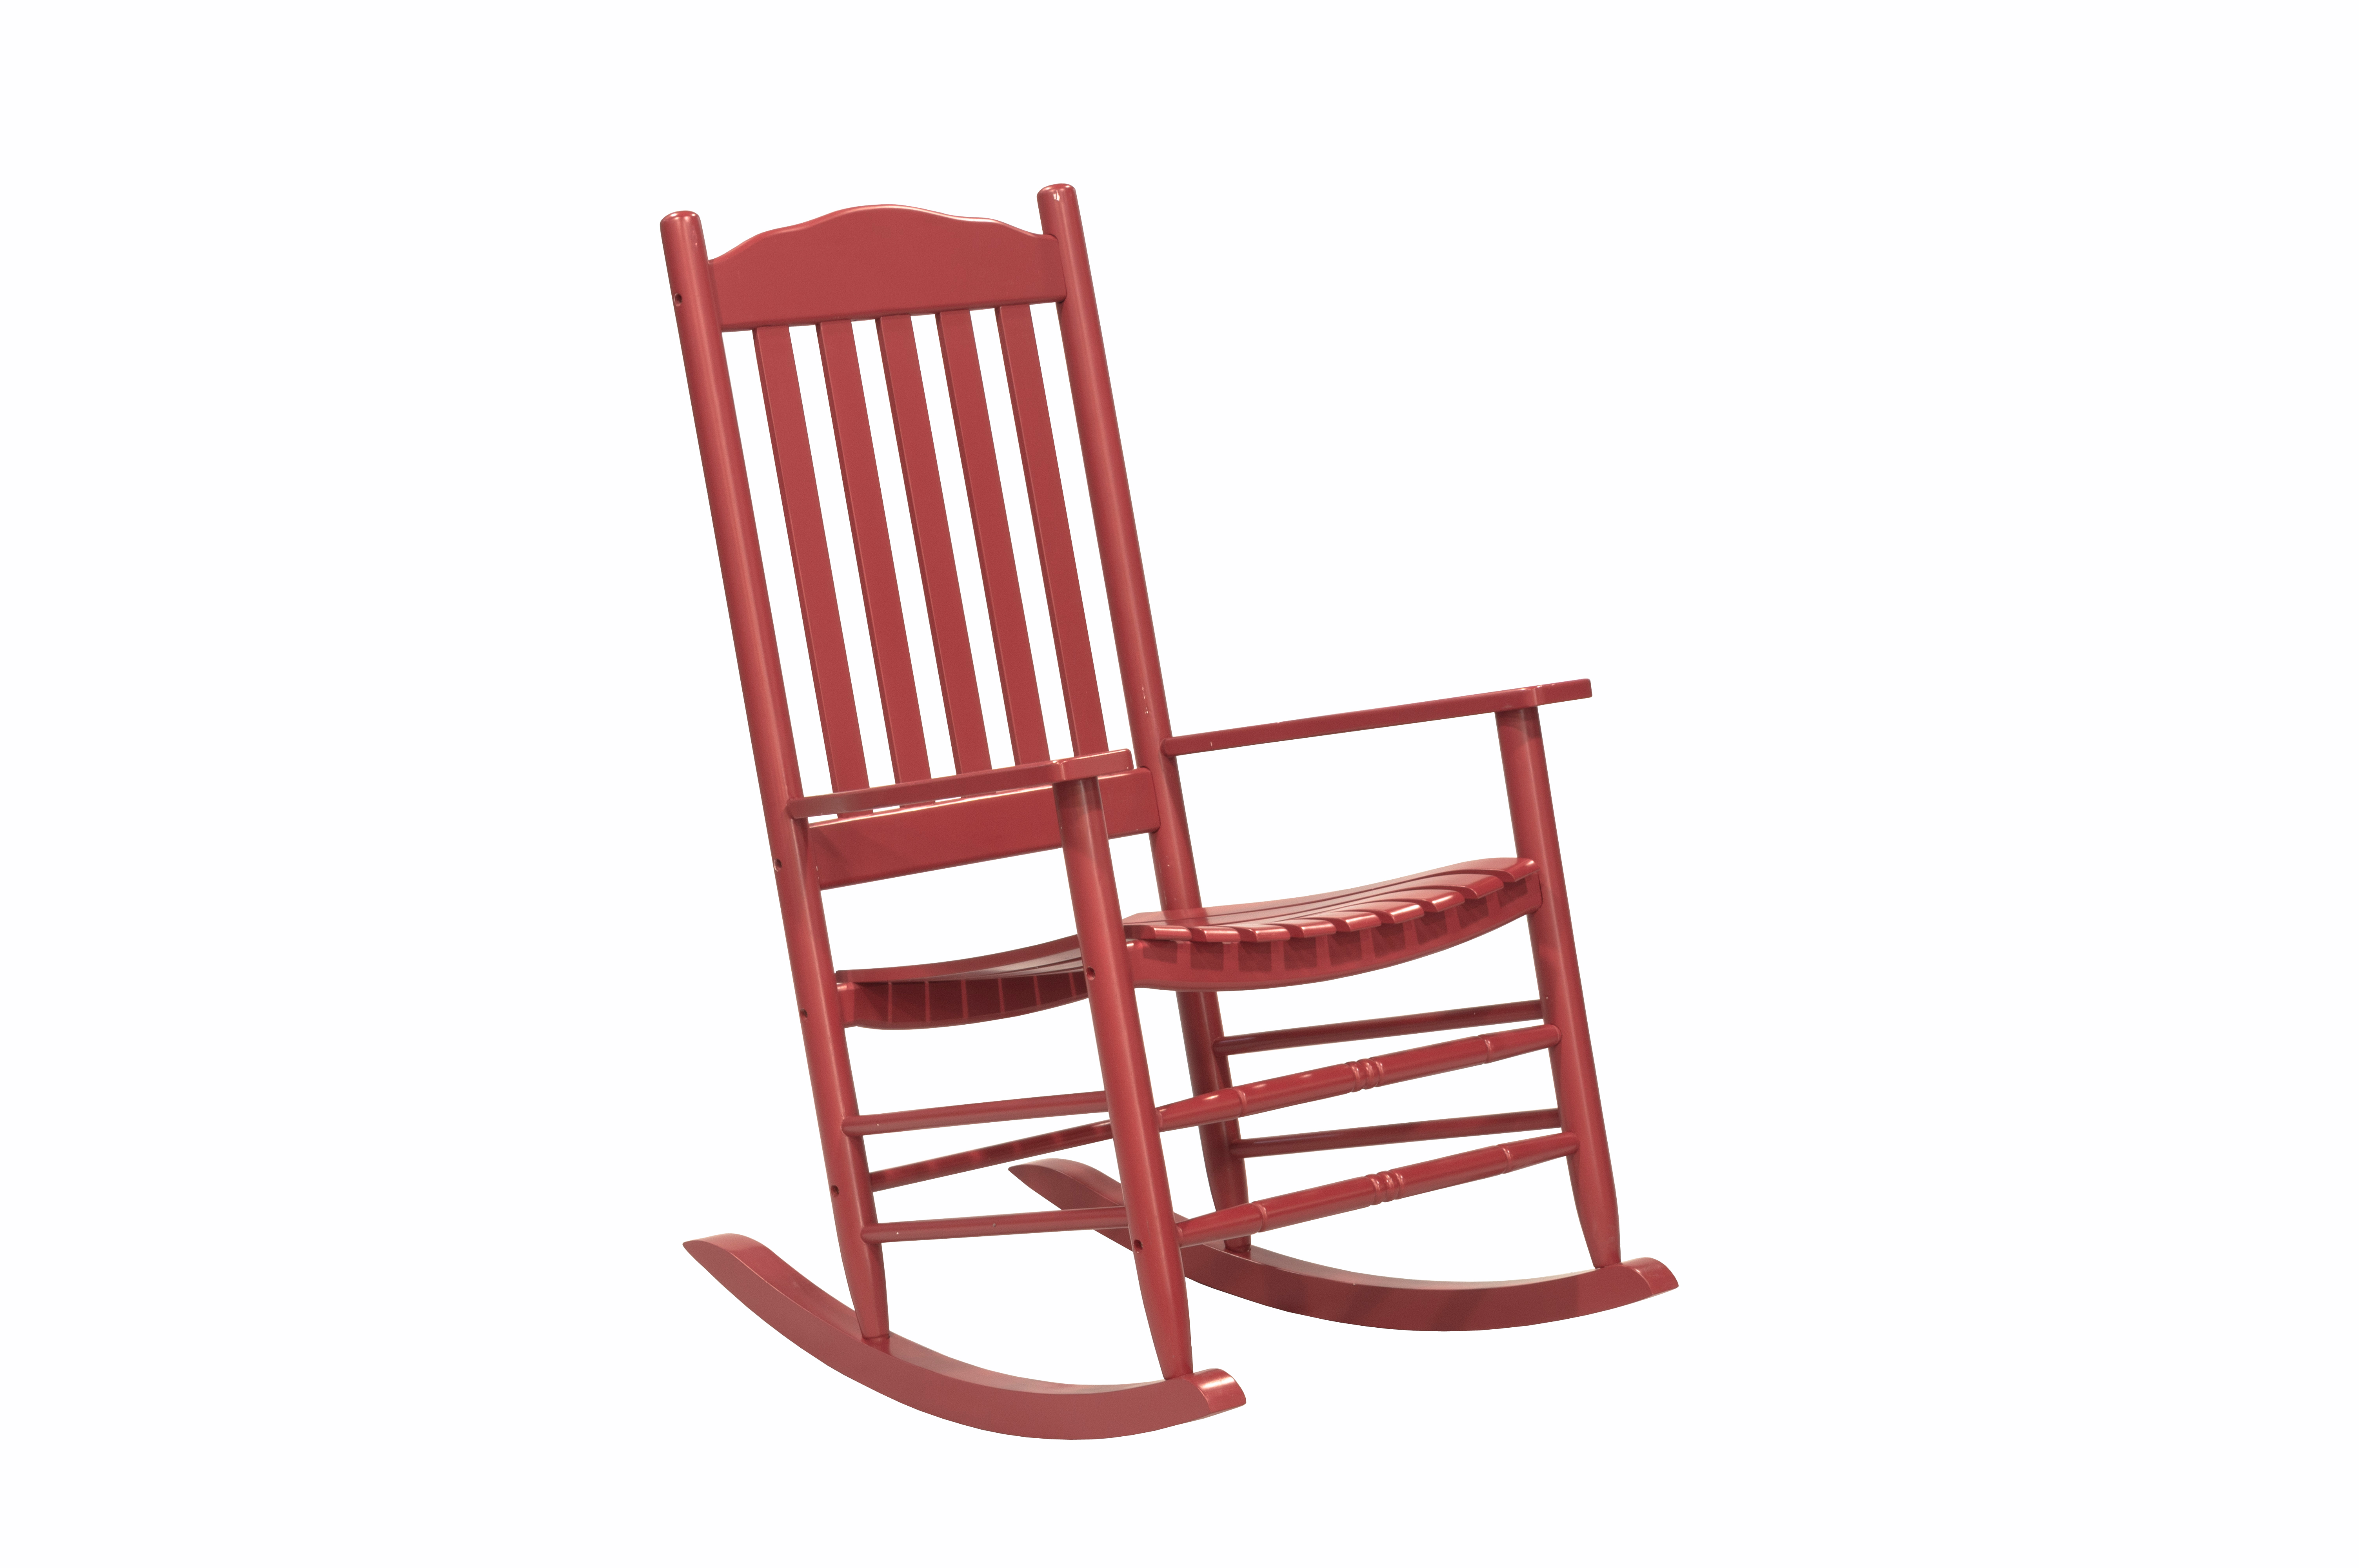 Outdoor Patio Garden Furniture 3-Piece Wood Porch Rocking Chair Set, Weather Resistant Finish,2 Rocking Chairs and 1 Side Table-Red - image 5 of 11